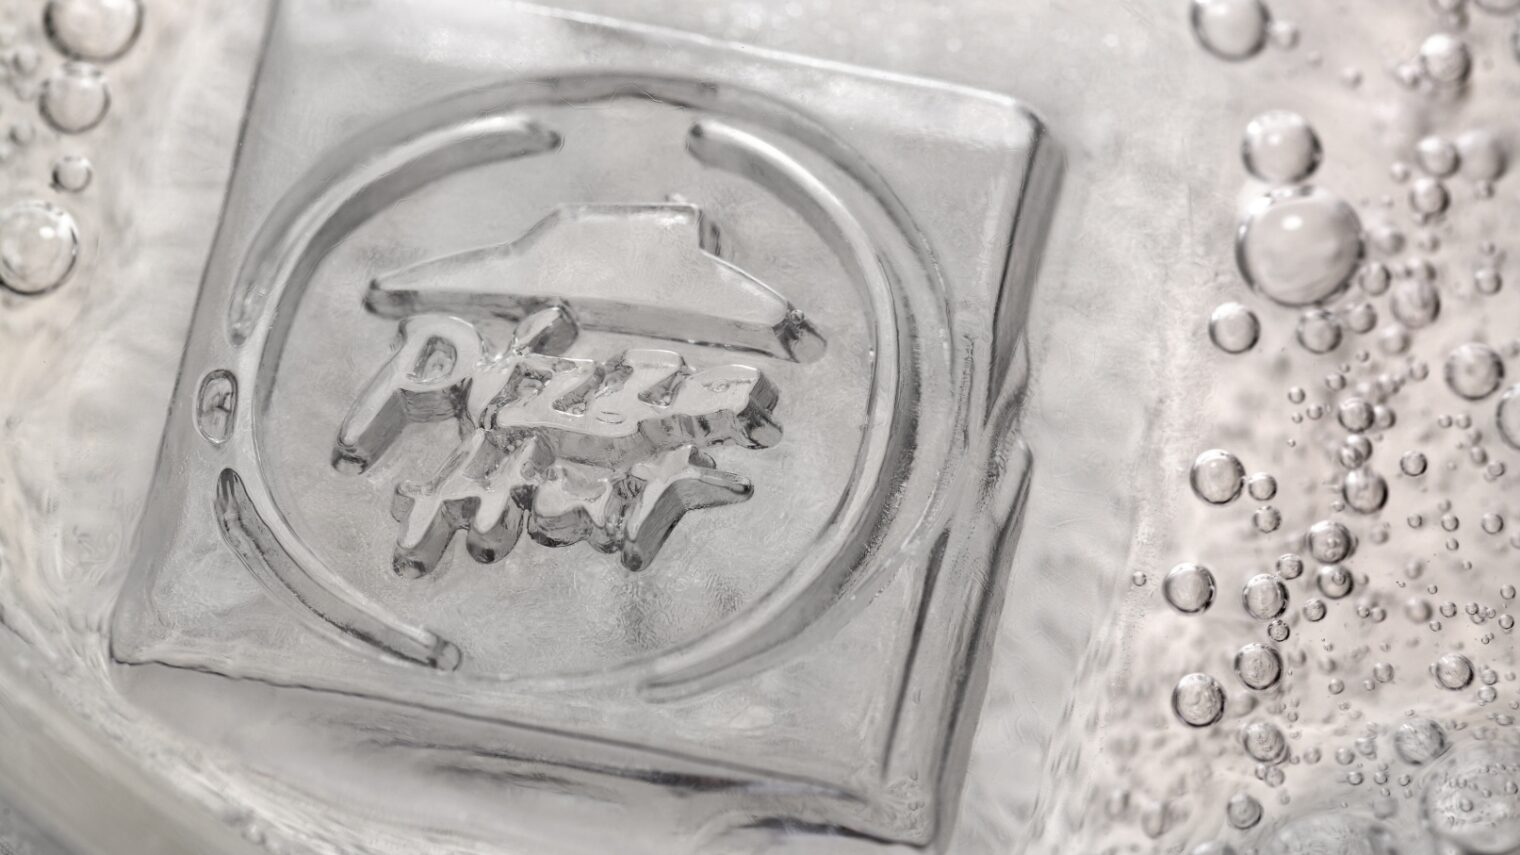 Making ice cubes even cooler with custom logos - ISRAEL21c